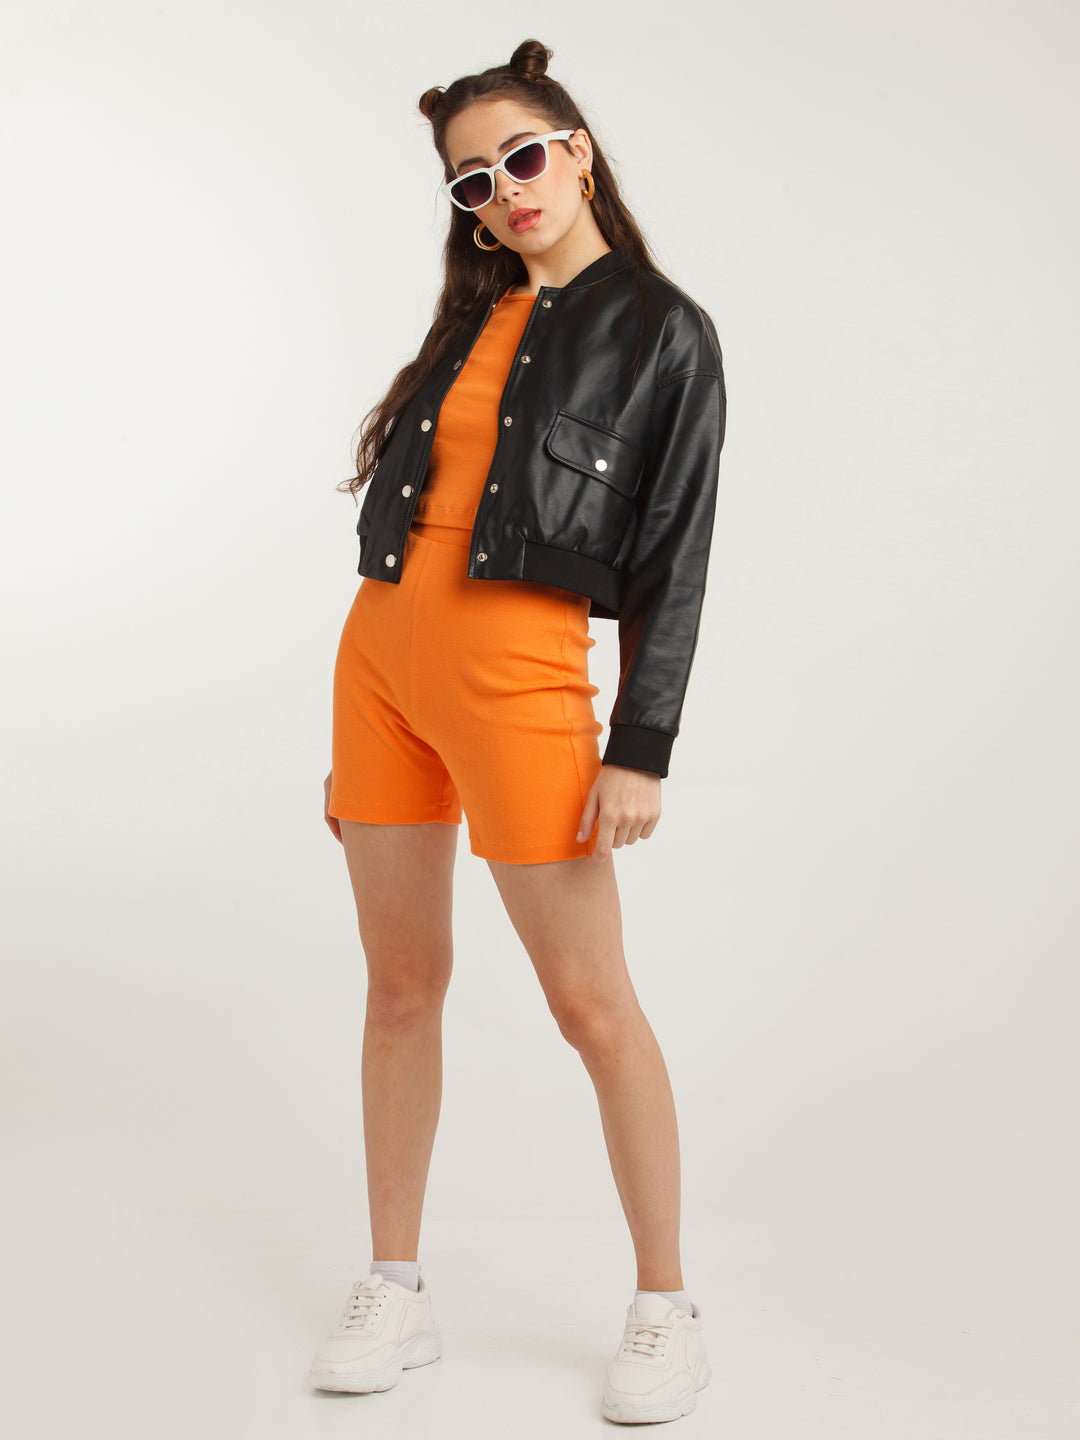 Orange Solid Fitted Shorts For Women